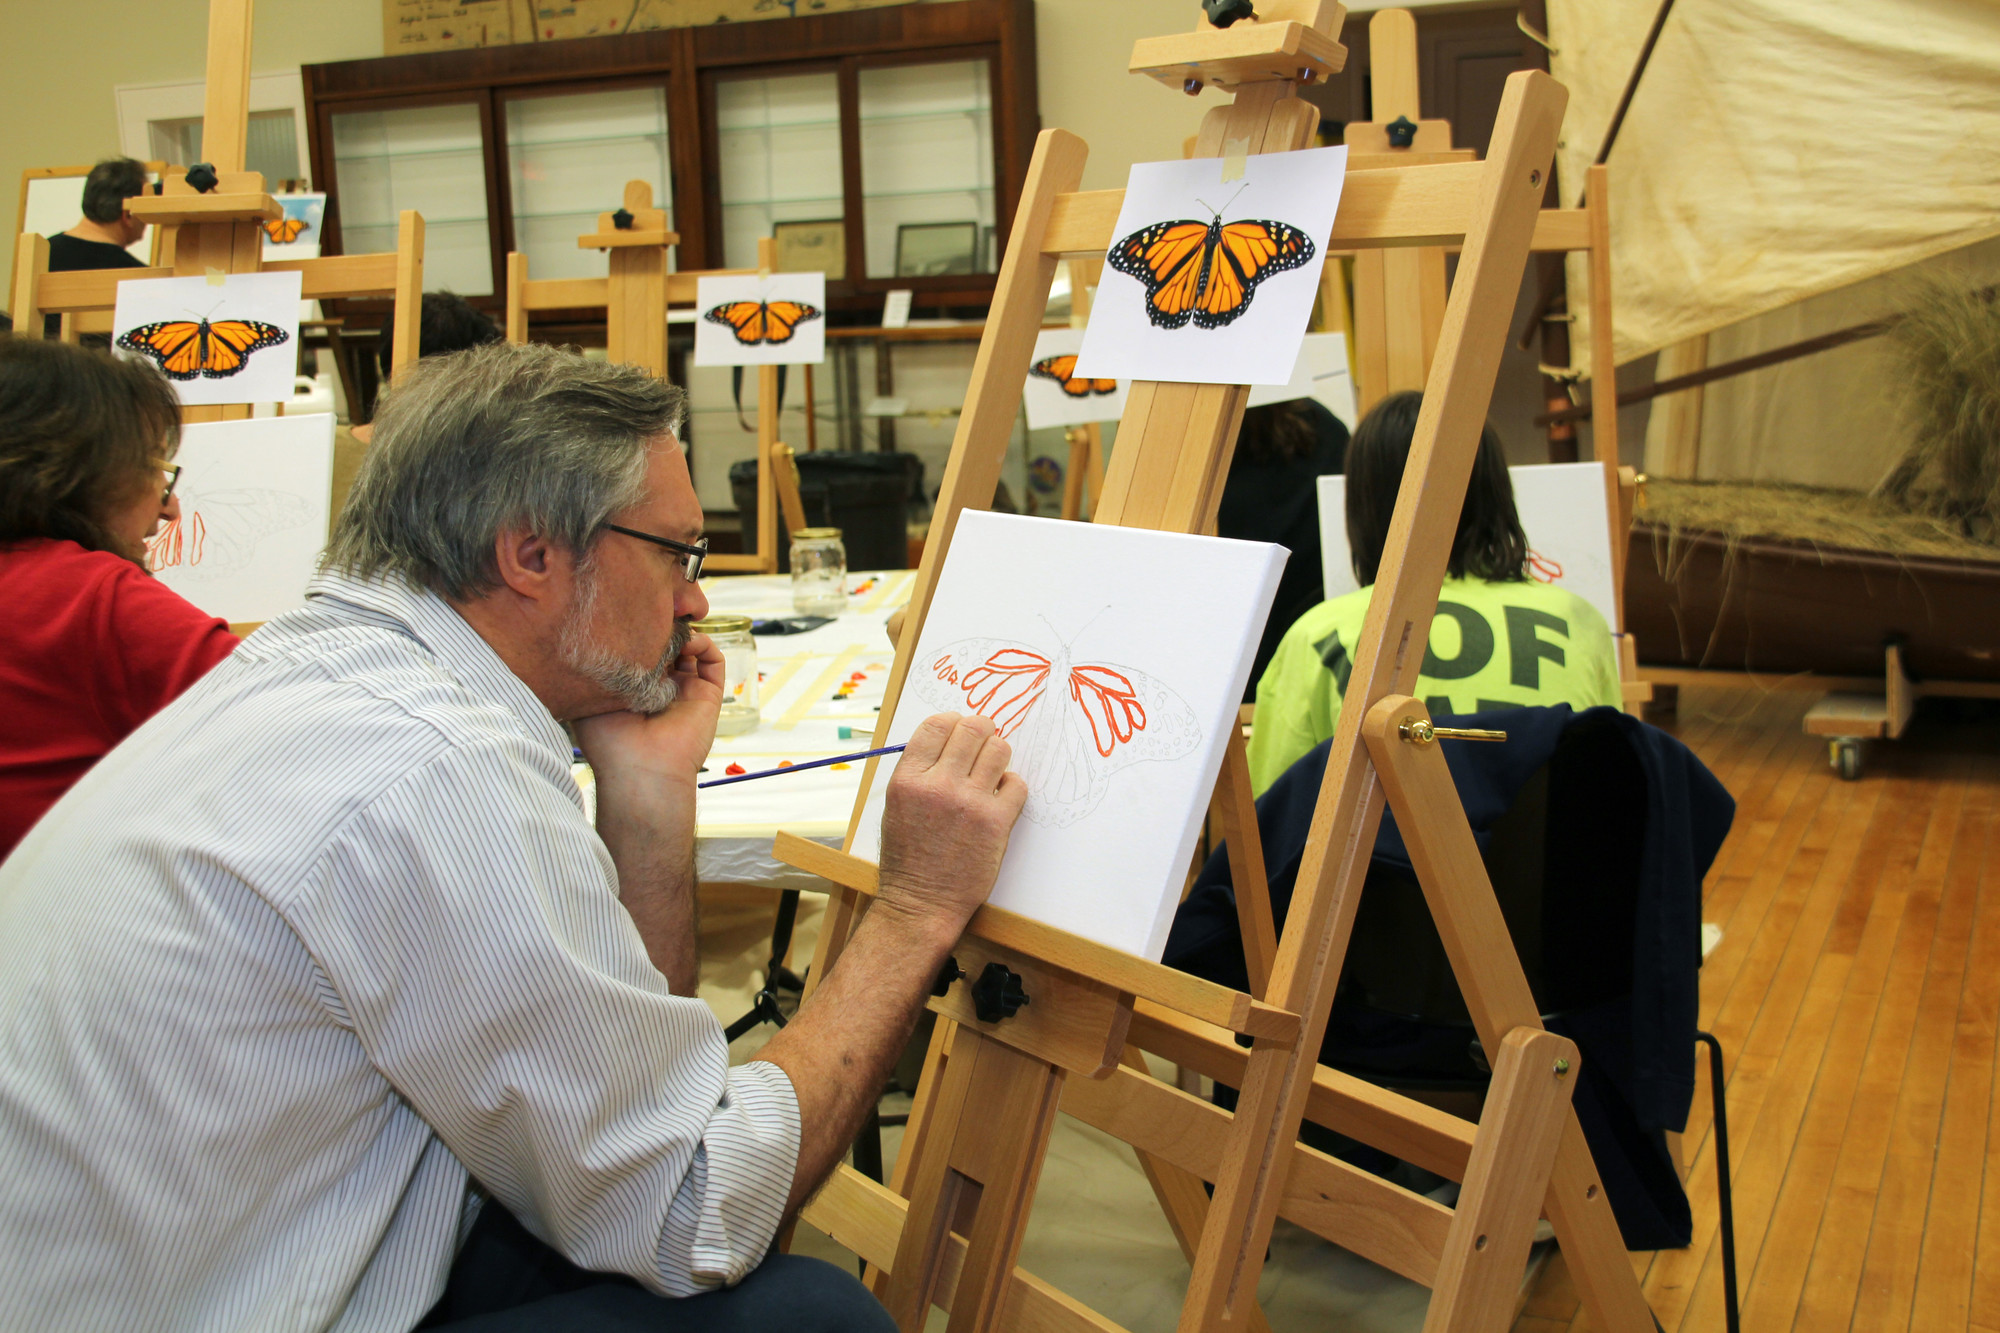 Mark Wurthmahn worked on his butterfly piece at Paint Night at the Museum on April 15, hosted by the Seaford Historical Society.